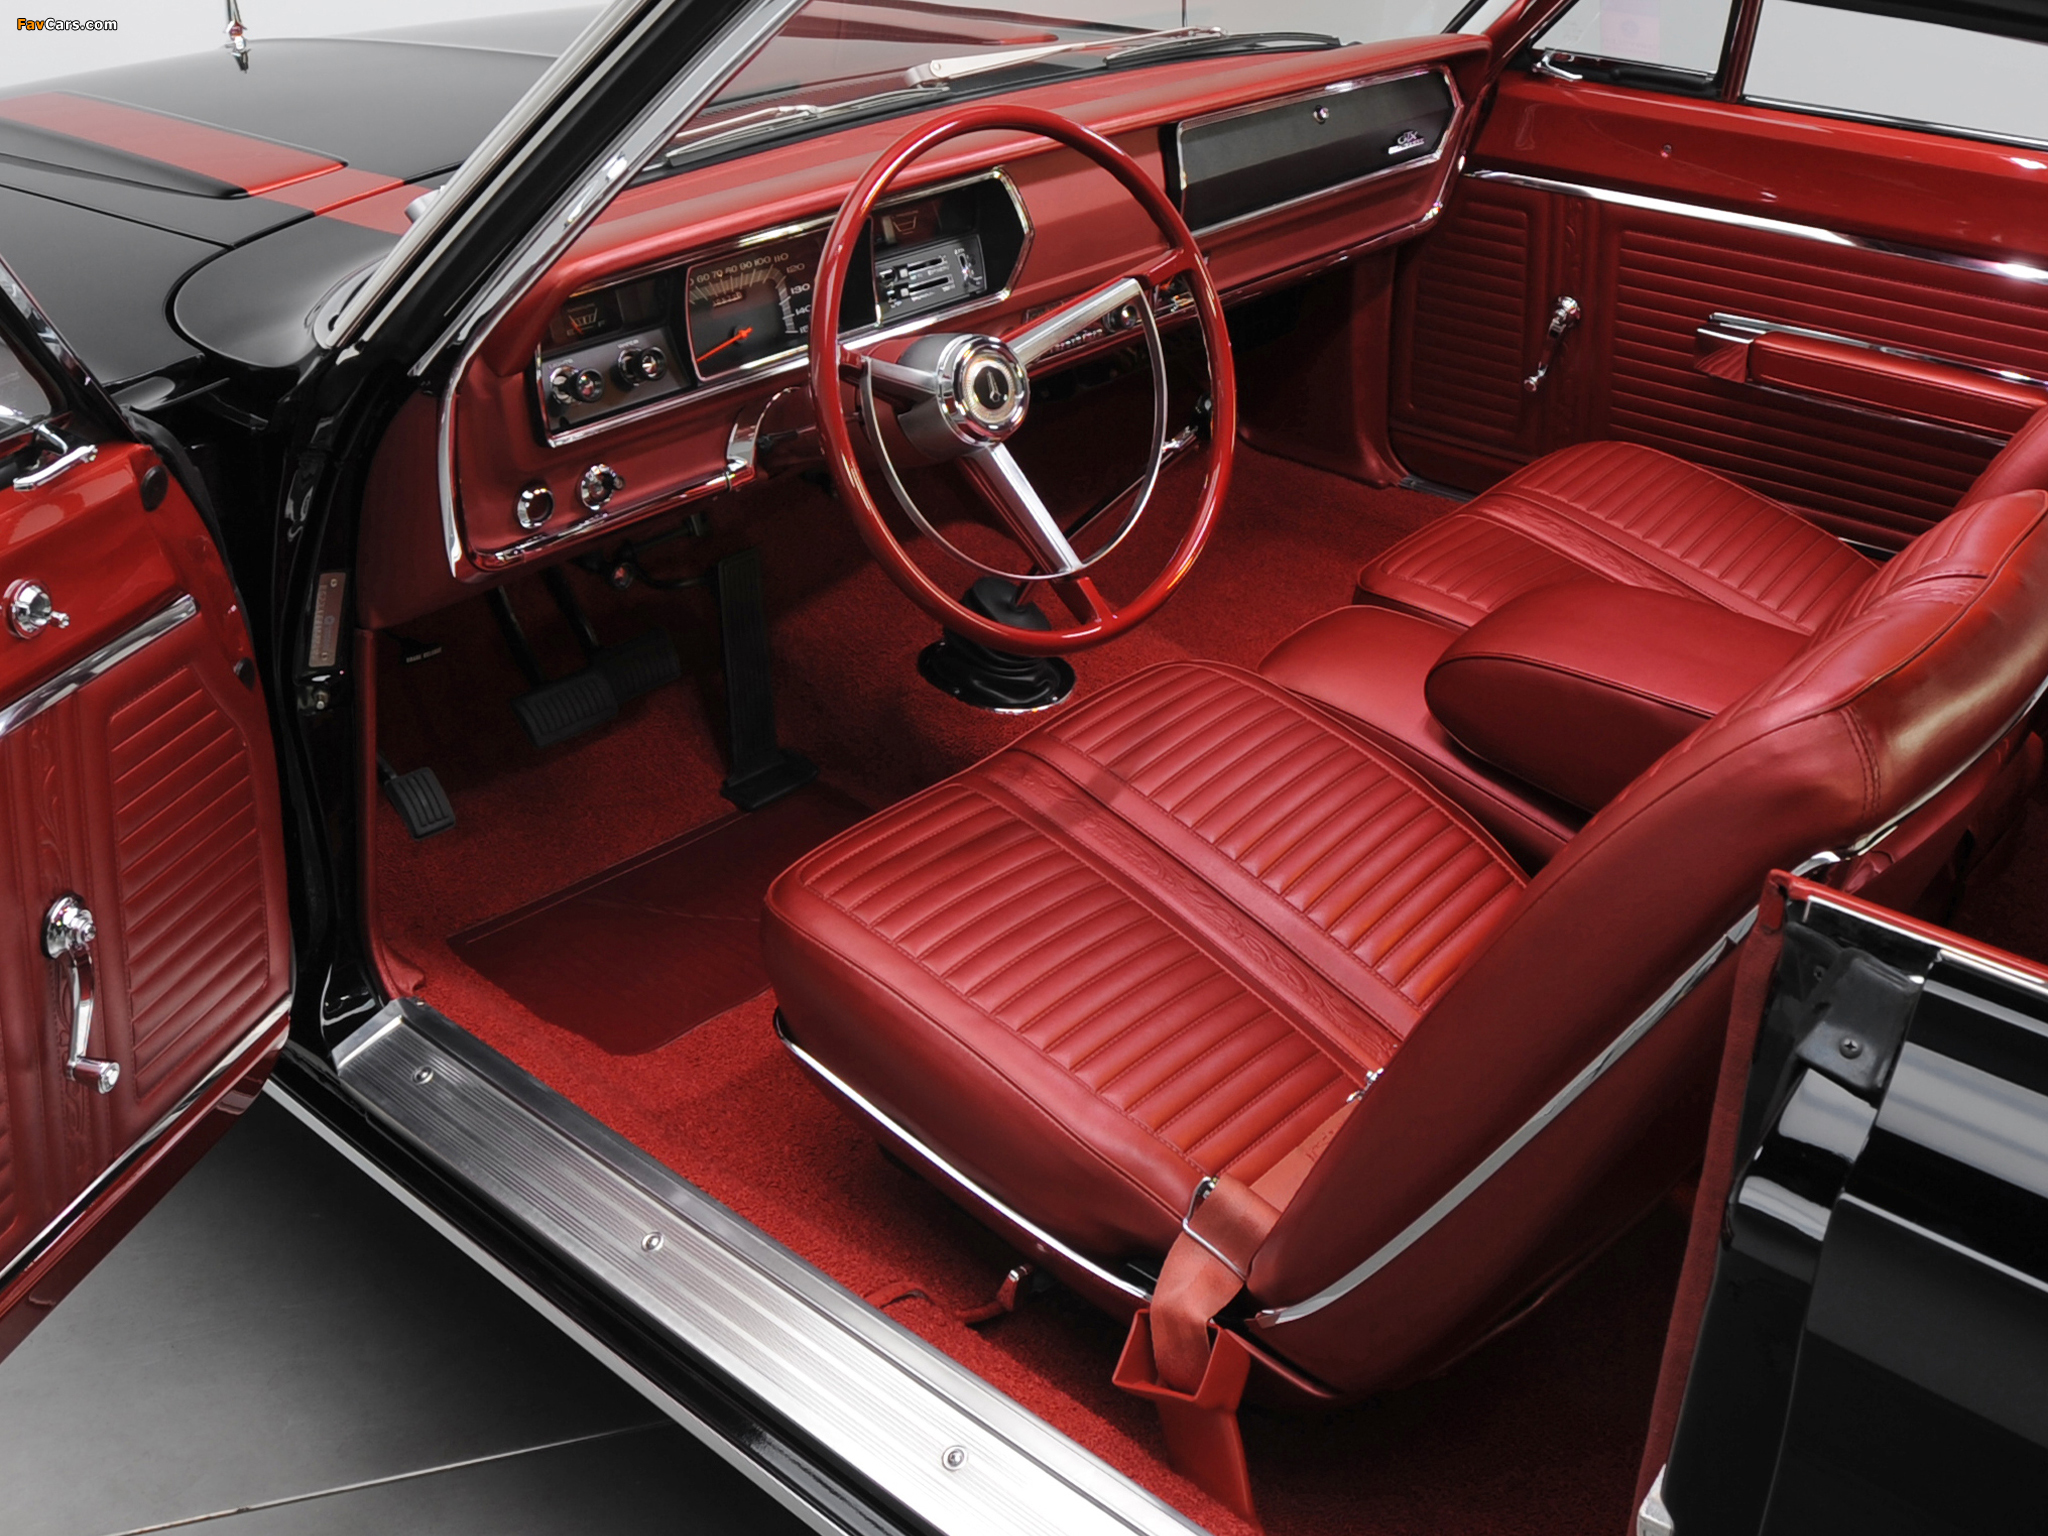 Images of Plymouth Belvedere GTX 426 Hemi 1967 (2048 x 1536)